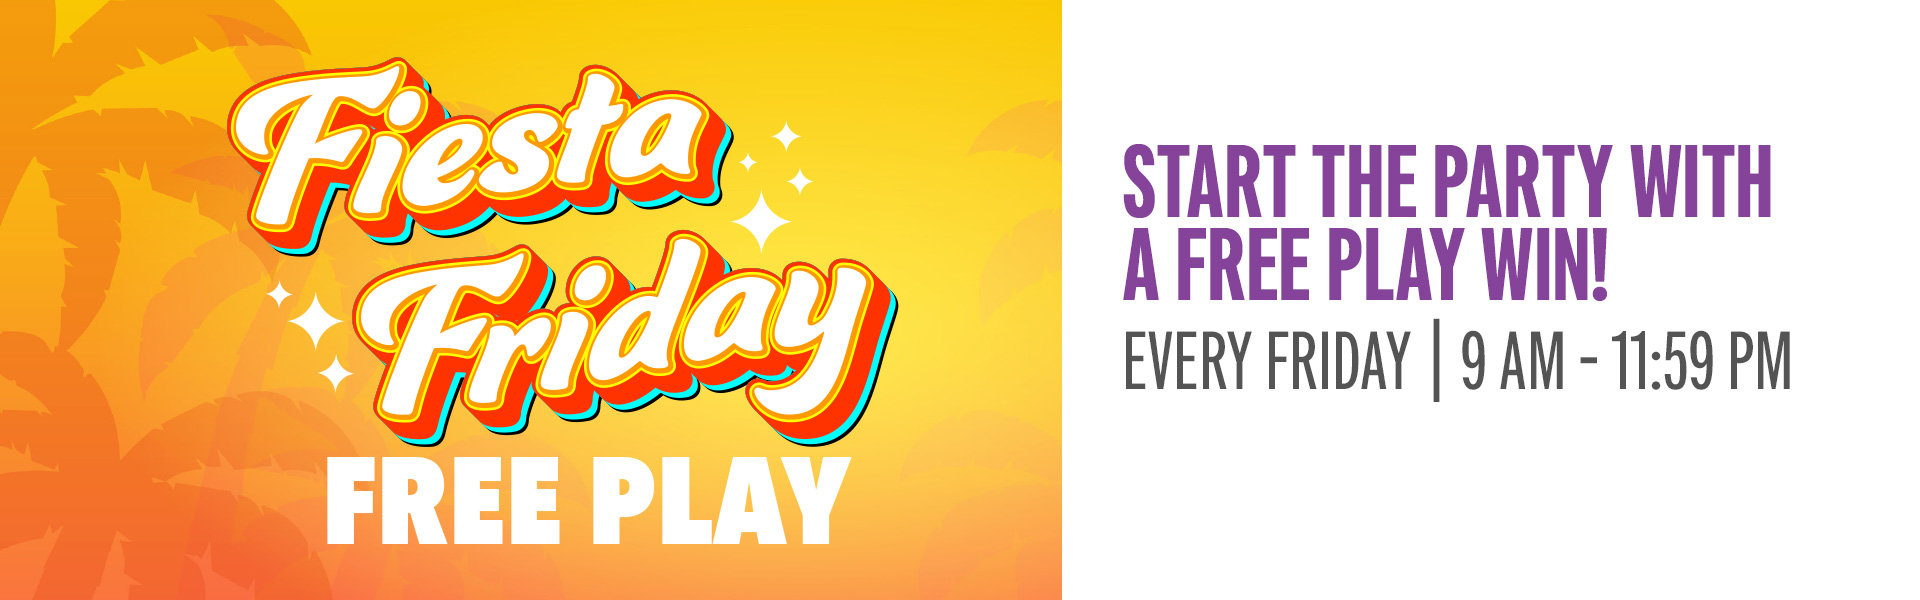 Earn 25 points to win up to $150 slot play!